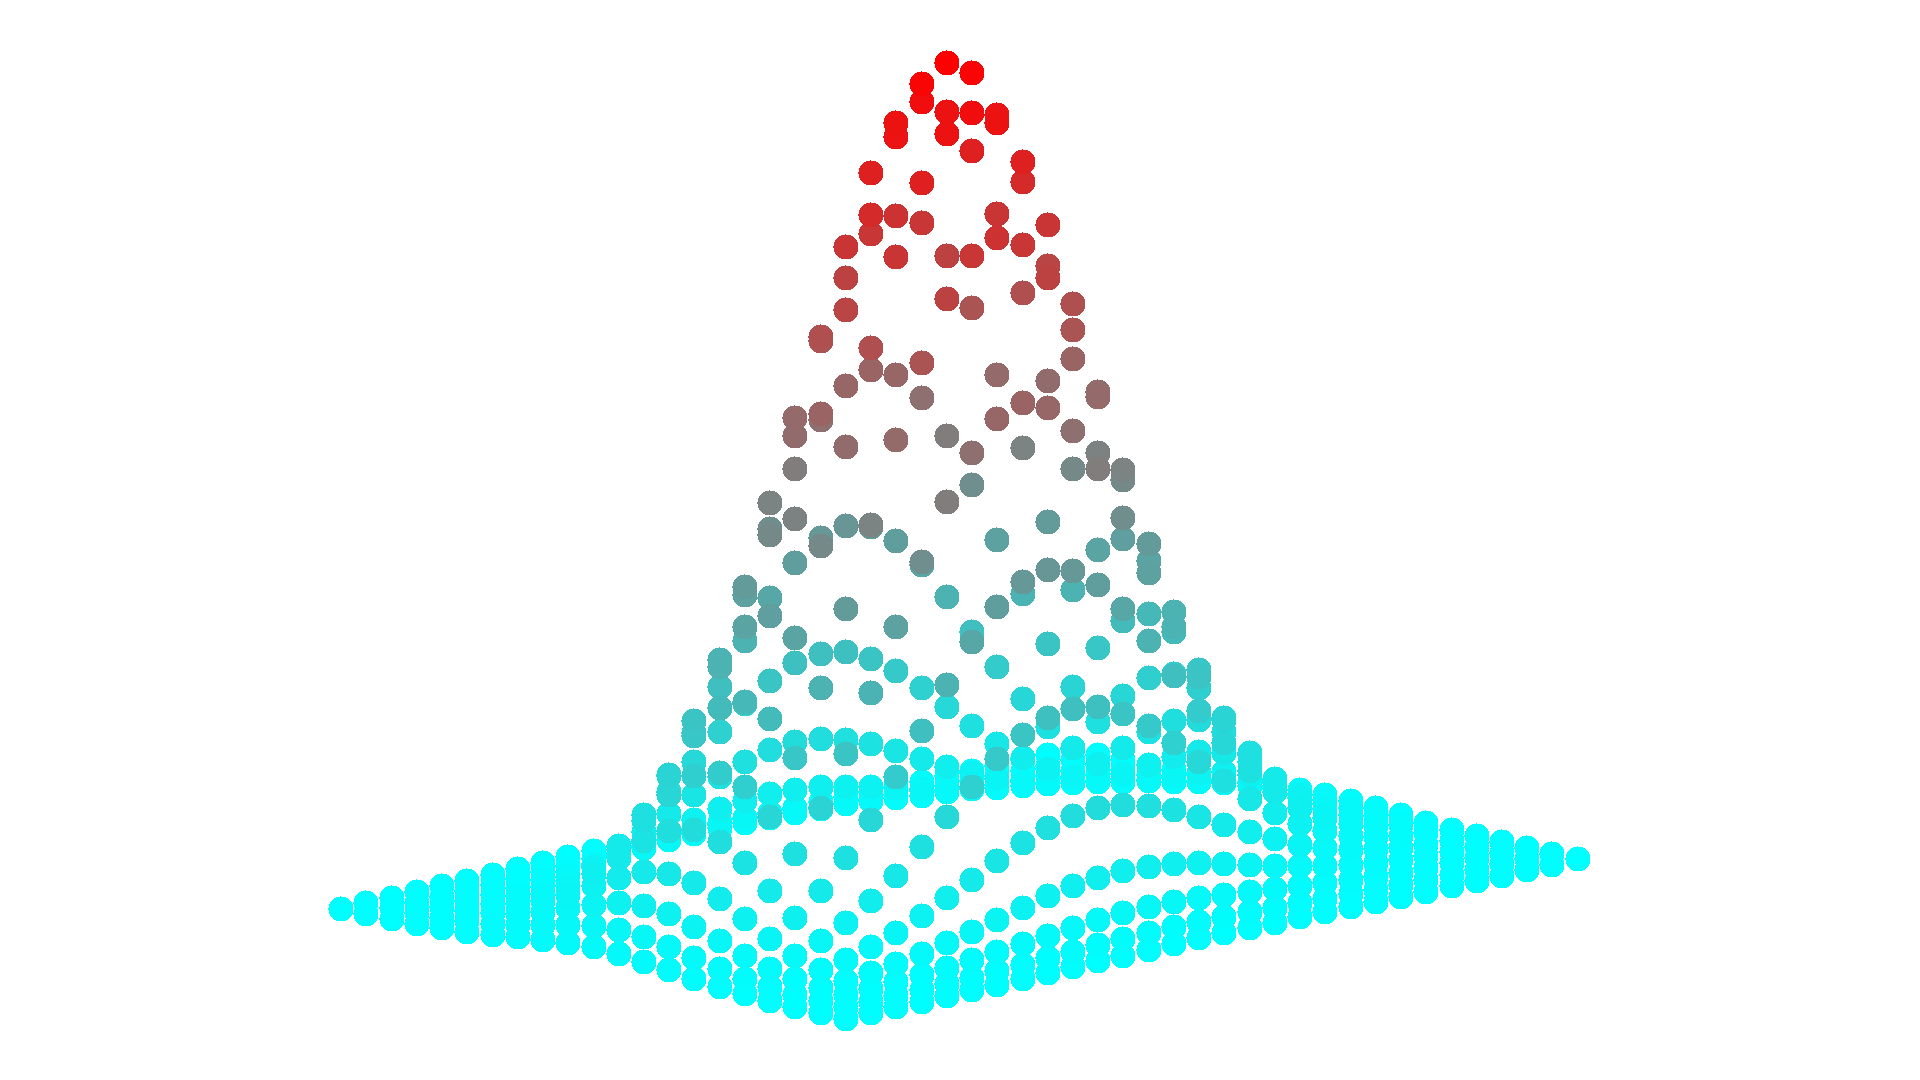 Example 4: Two-colored 3D-Plot